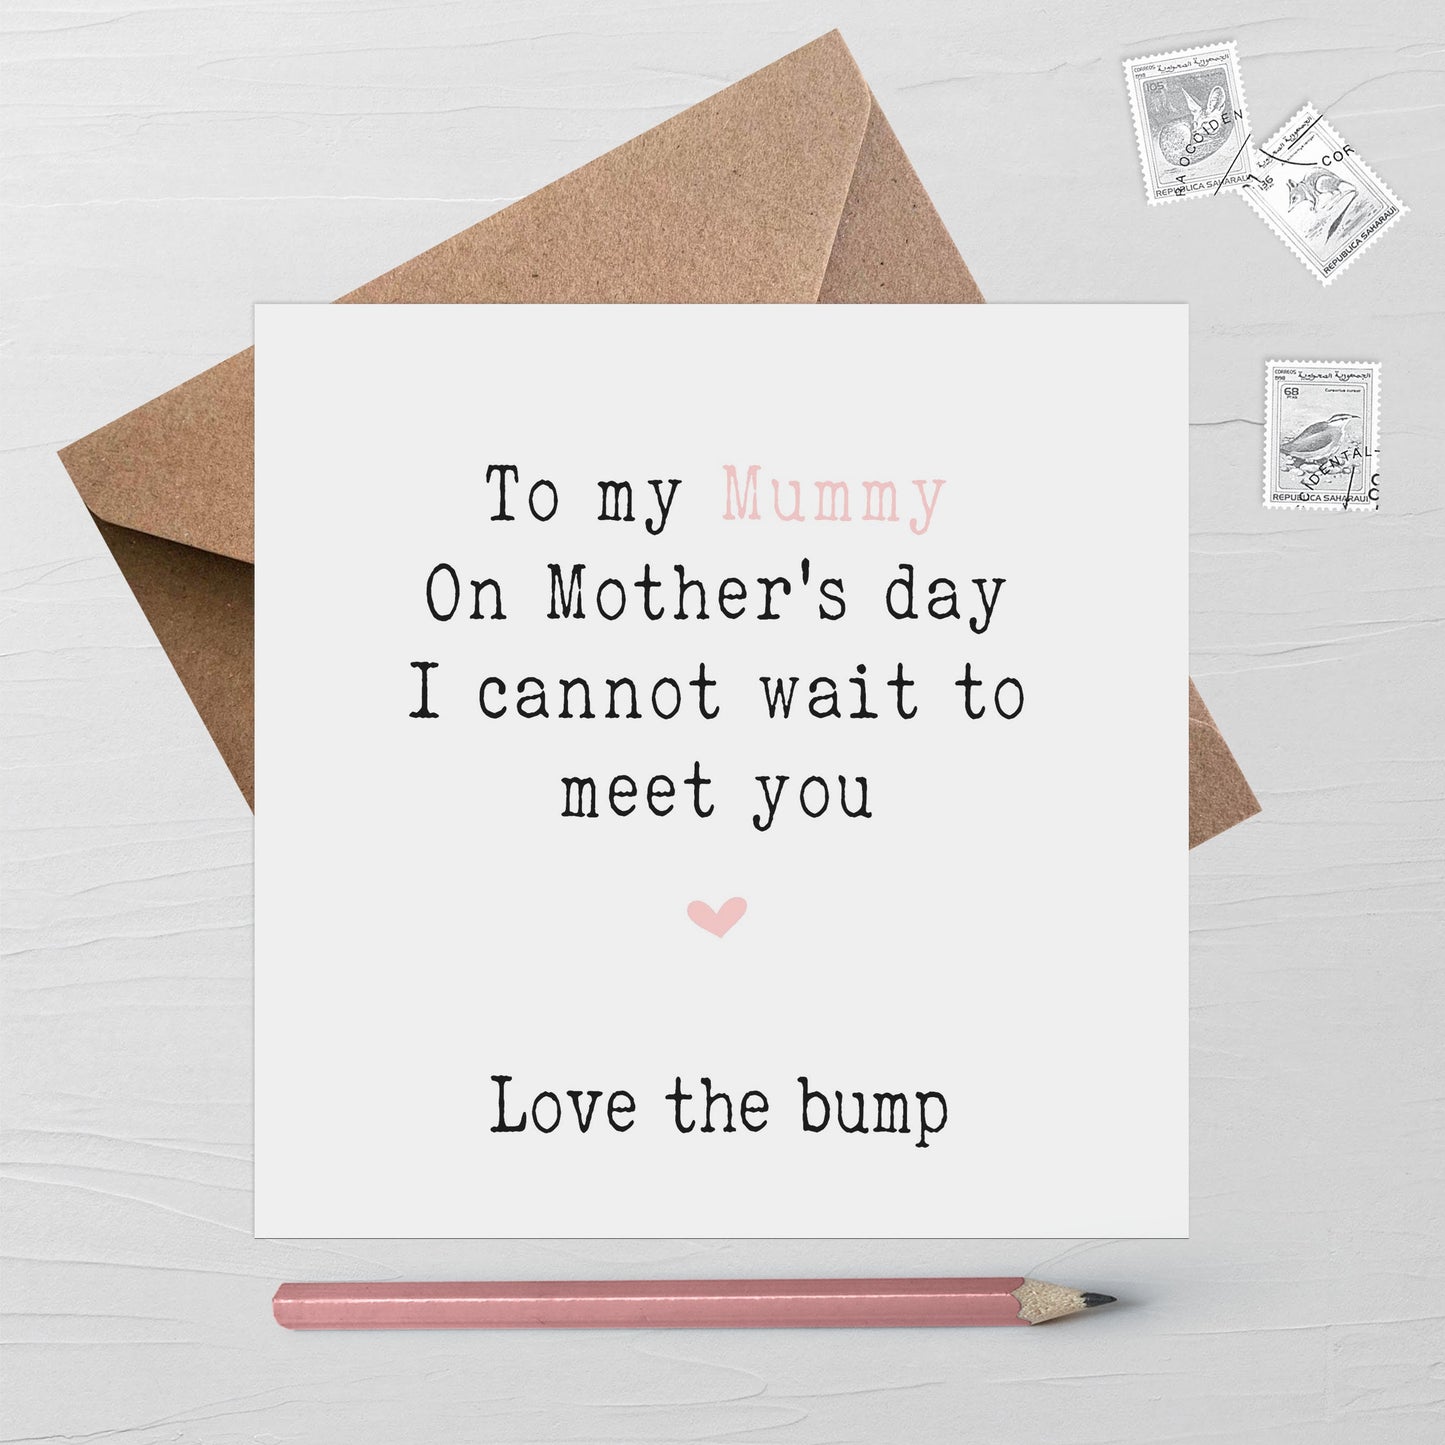 From The Bump Mother's Day Card, To my Mummy